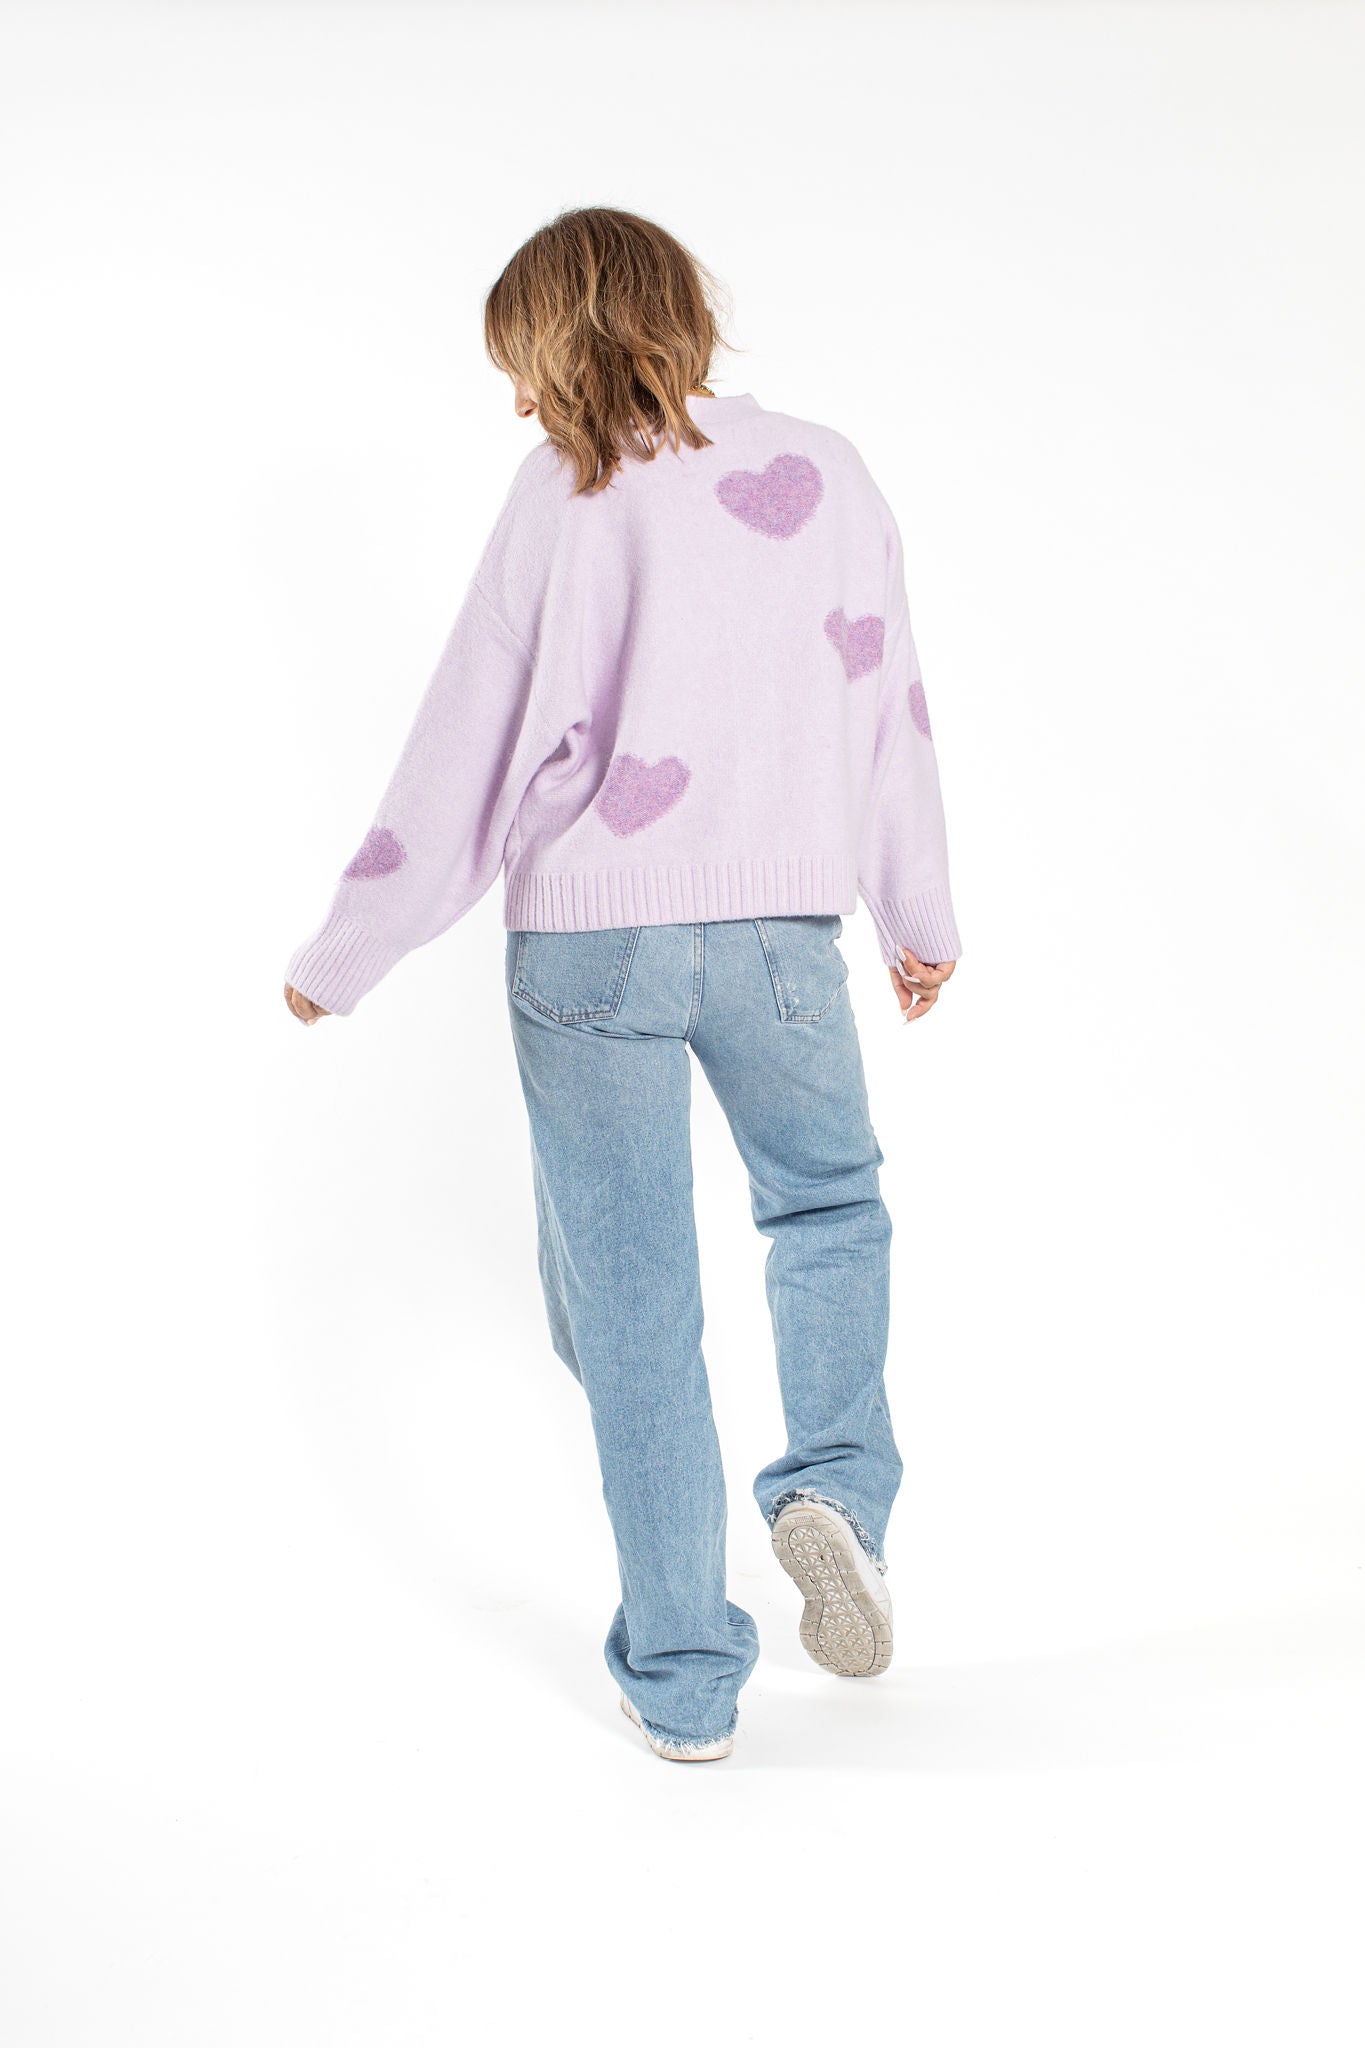 Eloise Heart Cardigan in Lilac Combo